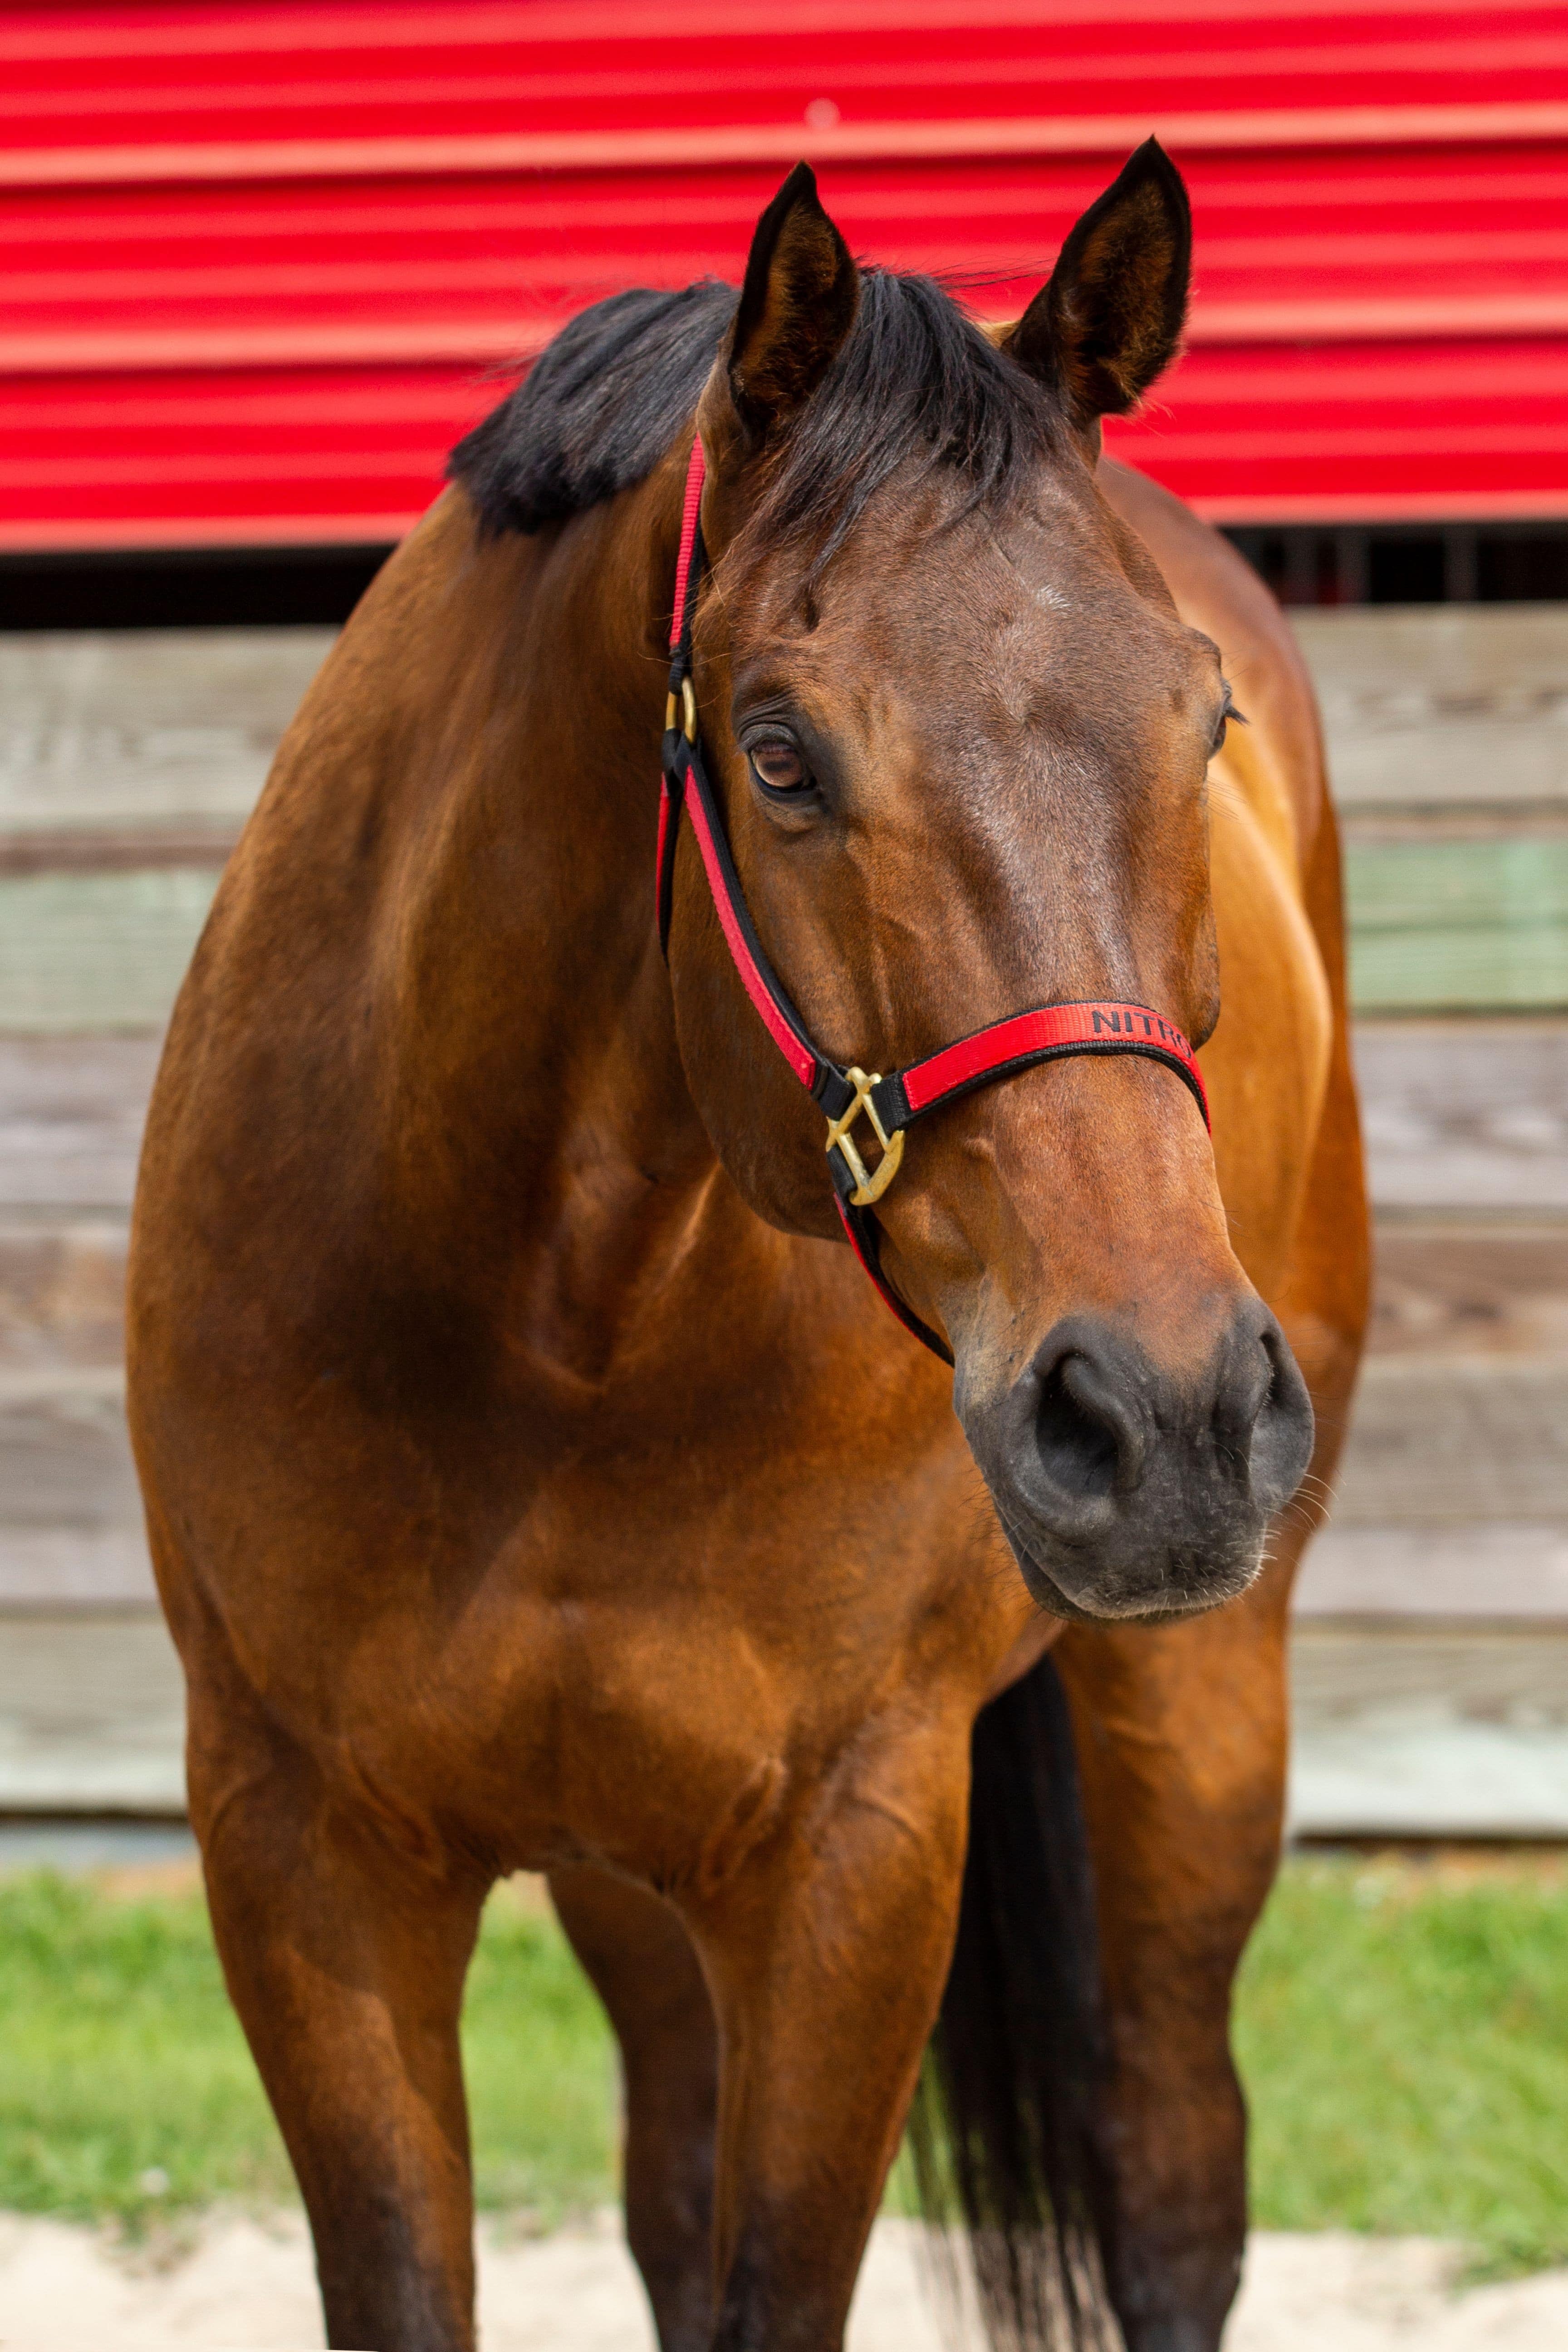 Nitro is an English and Western lesson horse at J & S Performance Horses. He is a bay gelding, wearing a red and black halter with his name on it.